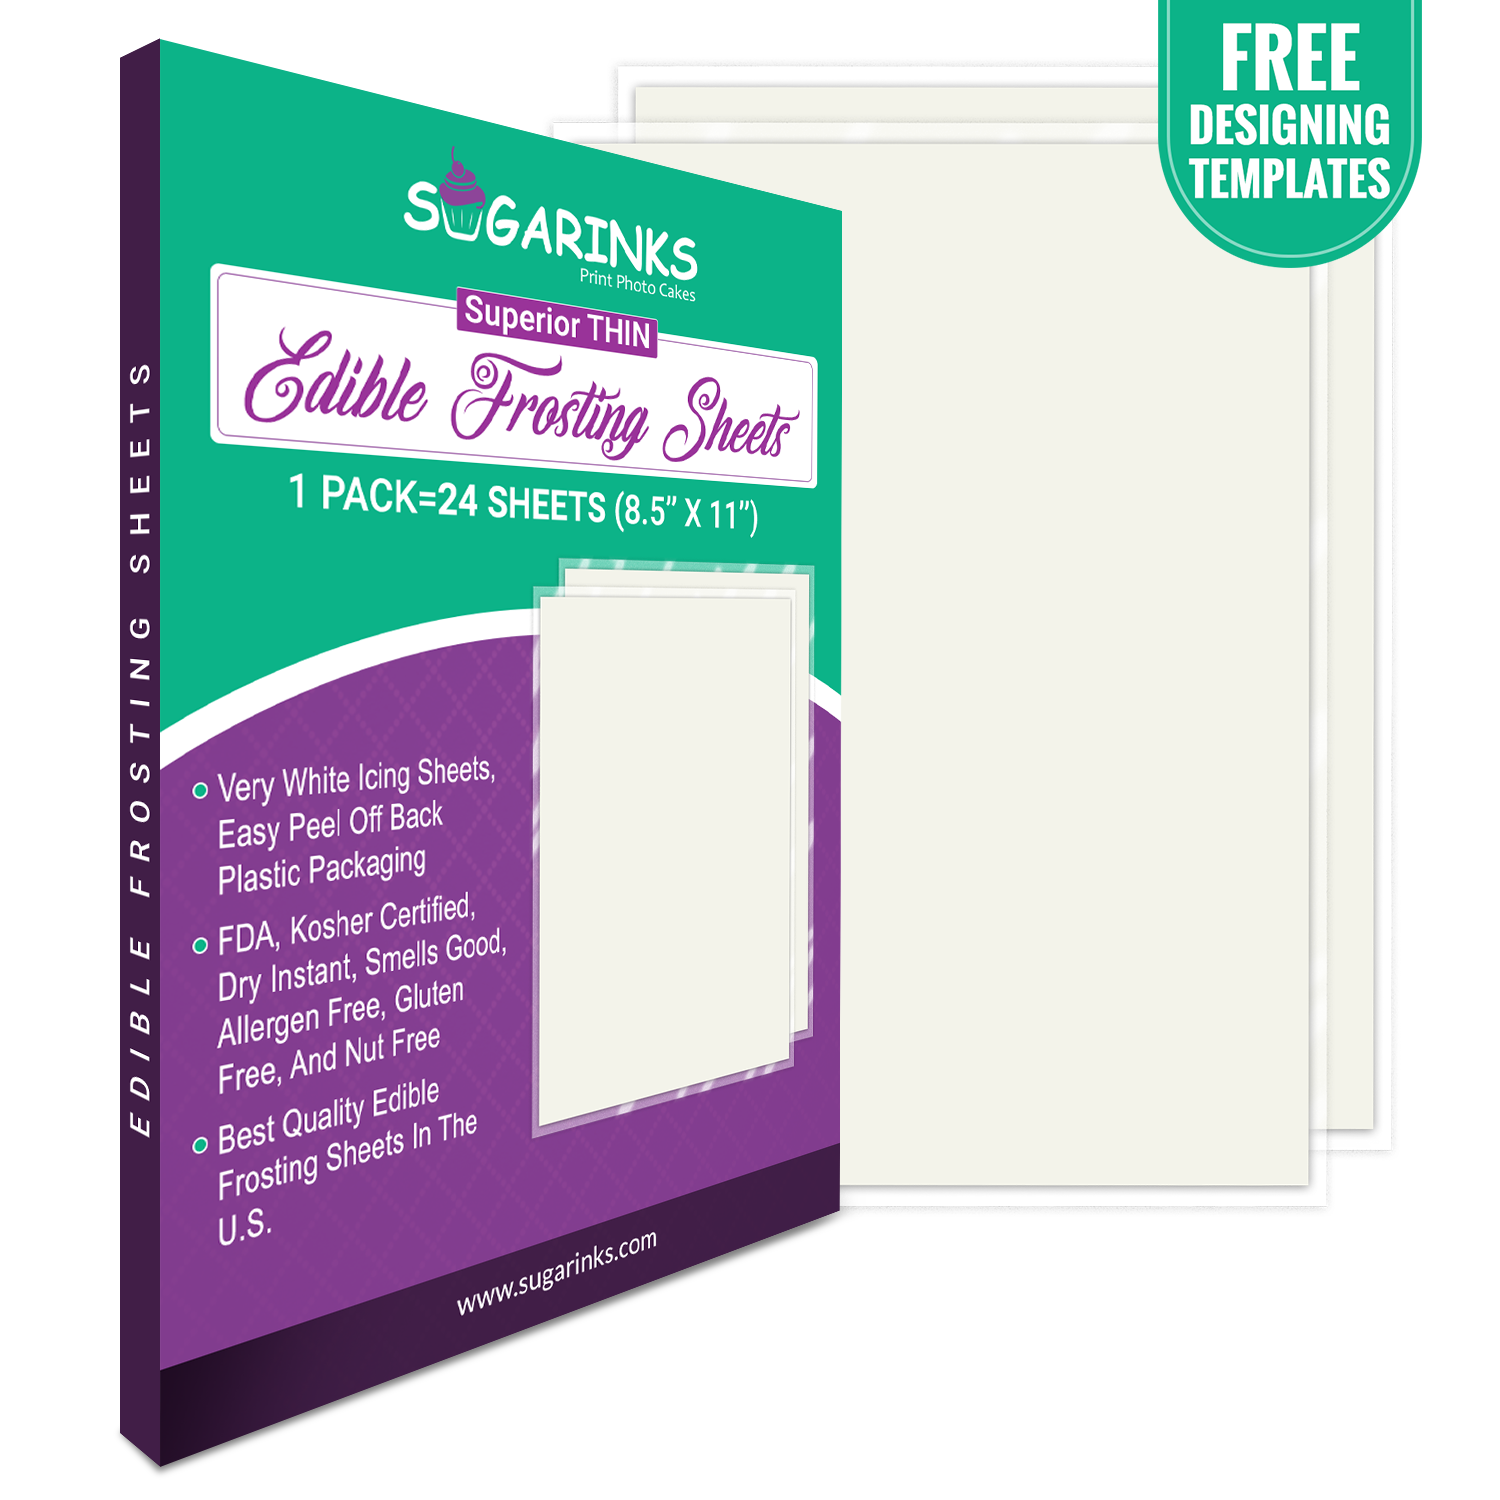 Sugarinks Superior Quality Thin Blank Frosting Sheets A4 Size (8.5”X11”) Pack of 24